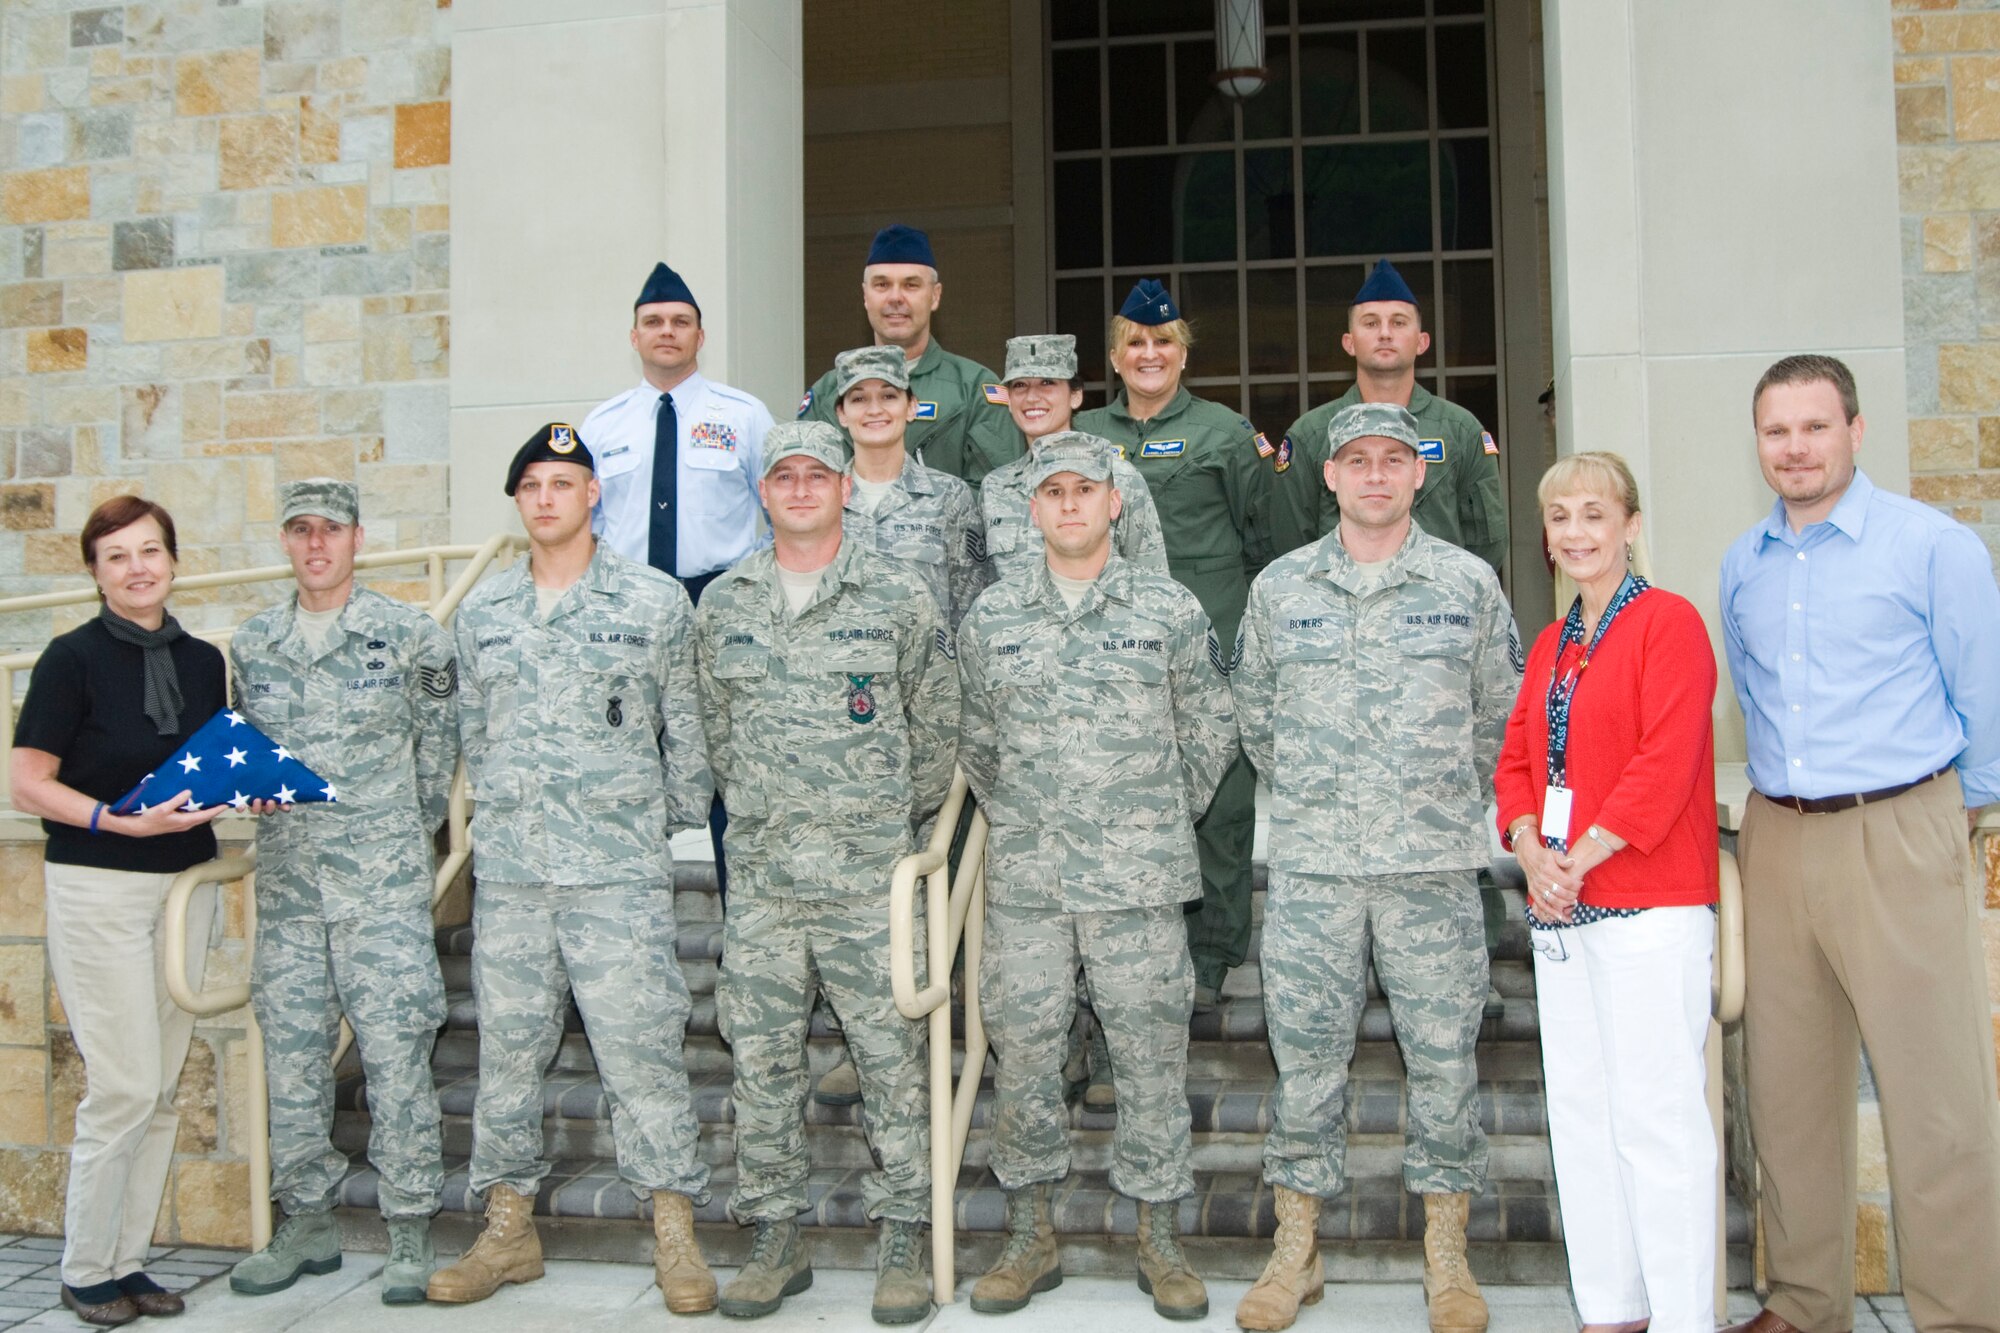 Airmen from the 167th Airlift Wing who call Morgan County home presented local officials with an American flag Saturday night to fly at the new courthouse in downtown Berkeley Springs, W.Va. Pictured in the first row, from left: Berkeley Springs Mayor Susan Webster, Tech Sgt. Sylvester Payne Jr., Staff Sgt. Luke Shambaugh, Staff Sgt. D.J. Zahnow, Master Sgt. Michael Darby, Master Sgt. Robert Bowers, Morgan County Commissioner Brenda Hutchinson and Morgan County Commissioner Brad Close. Second row, from left: Tech. Sgt. Gretchen Close and 1st Lt. Sarah Law. Third row, from left: Senior Master Sgt. Scott Wachter, Chief Master Sgt. Roland Shambaugh Jr., Capt. Carmela Emerson and Senior Airman John Unger rounding out the back row. (U.S. Air Force photo by Staff Sgt. Sherree Grebenstein)